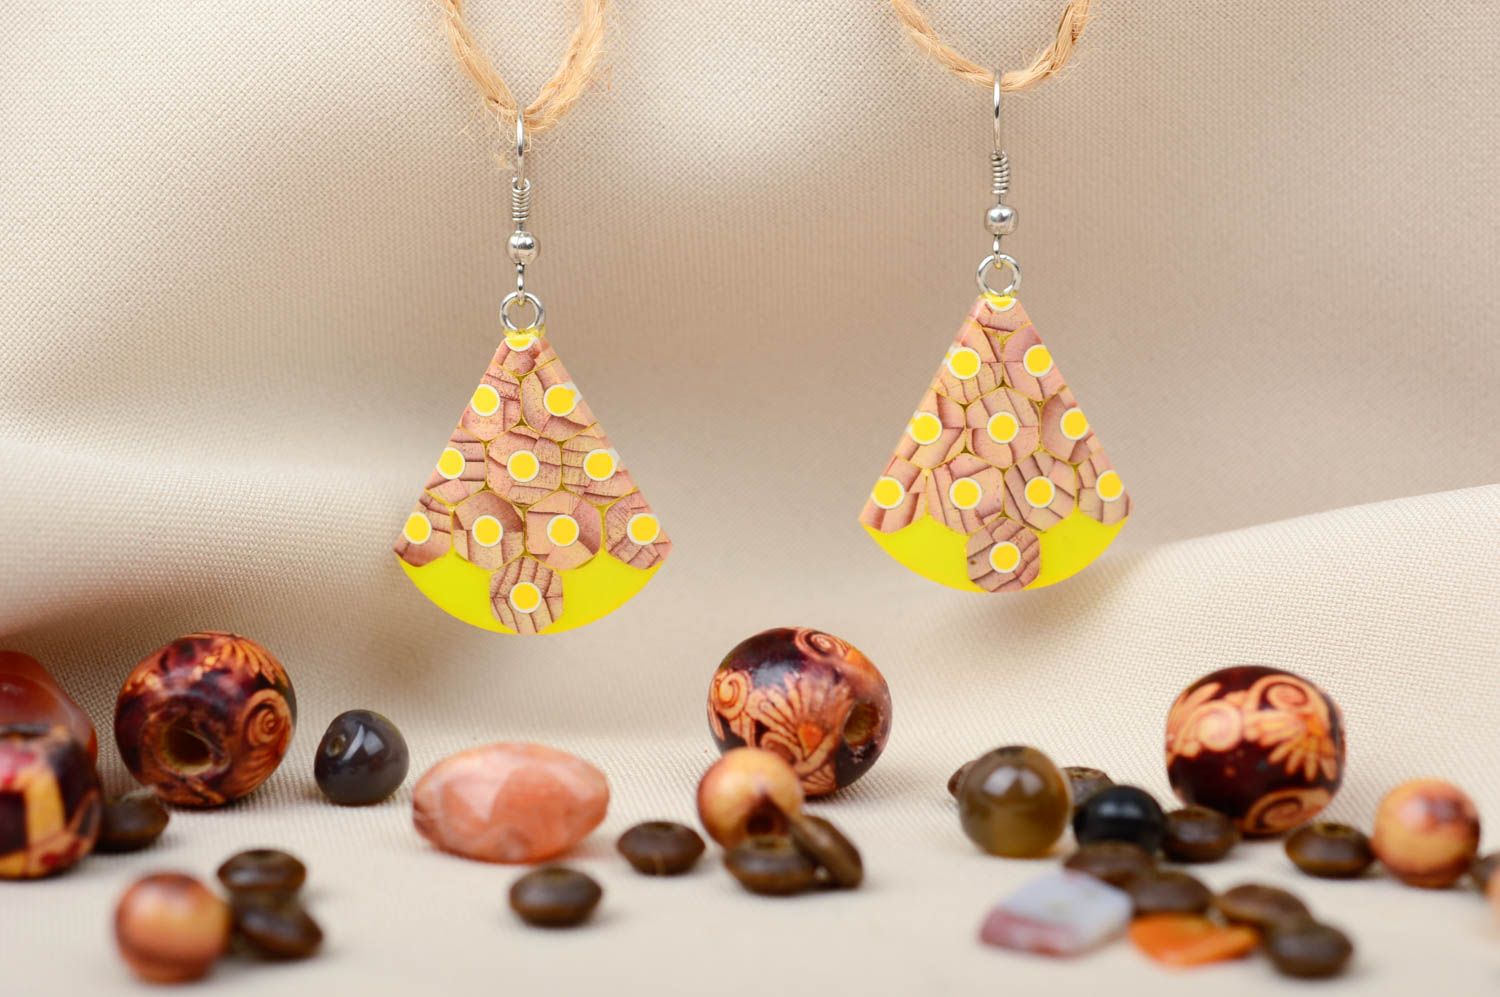 Wooden earrings handmade elegant earrings with charms fashion jewelry for women photo 1